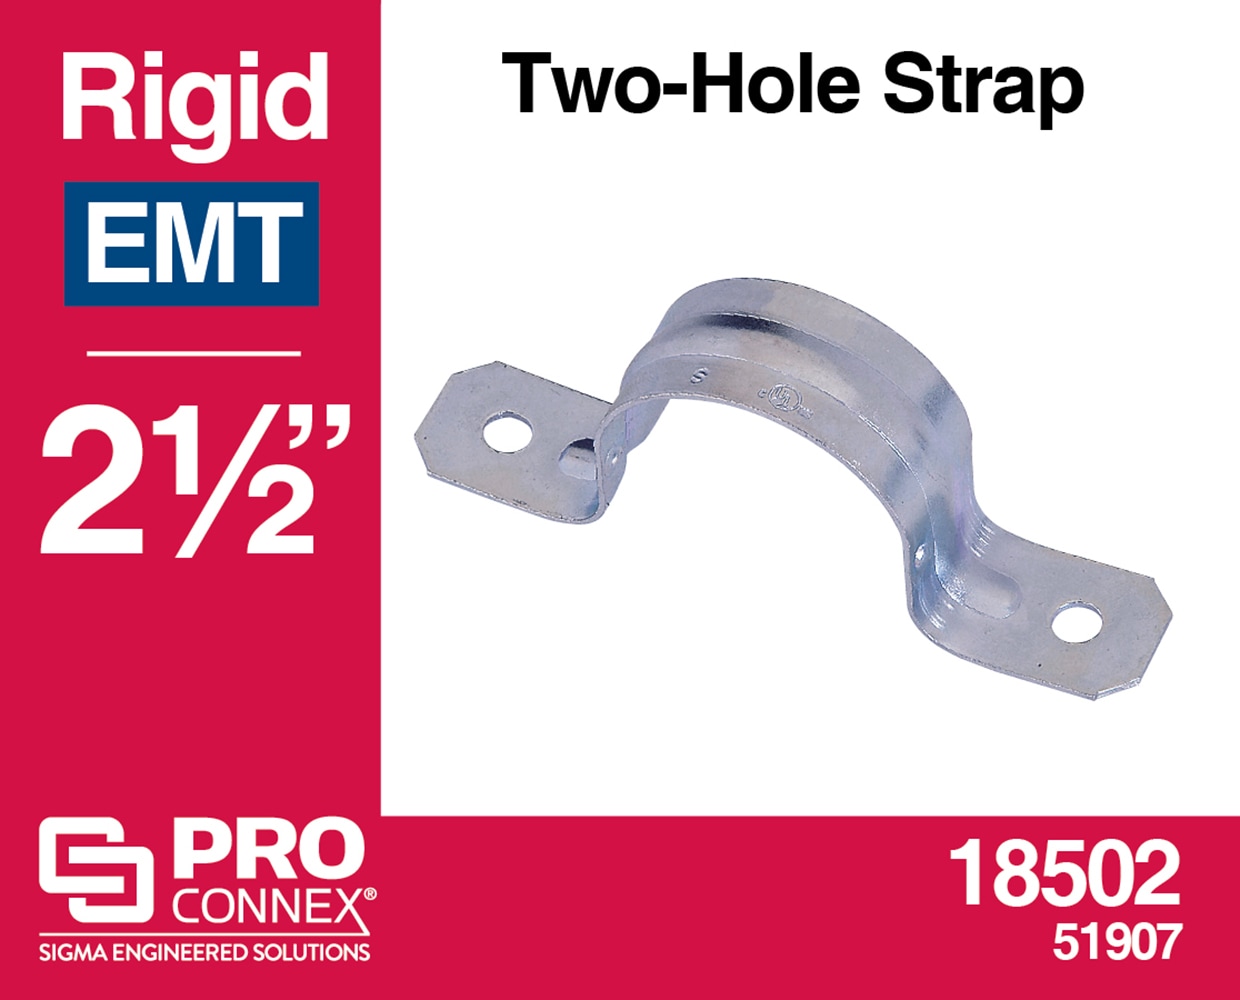 Steel 2 Two Hole HW Rigid Conduit Straps 1/2" Snap On Fittings 10 Count